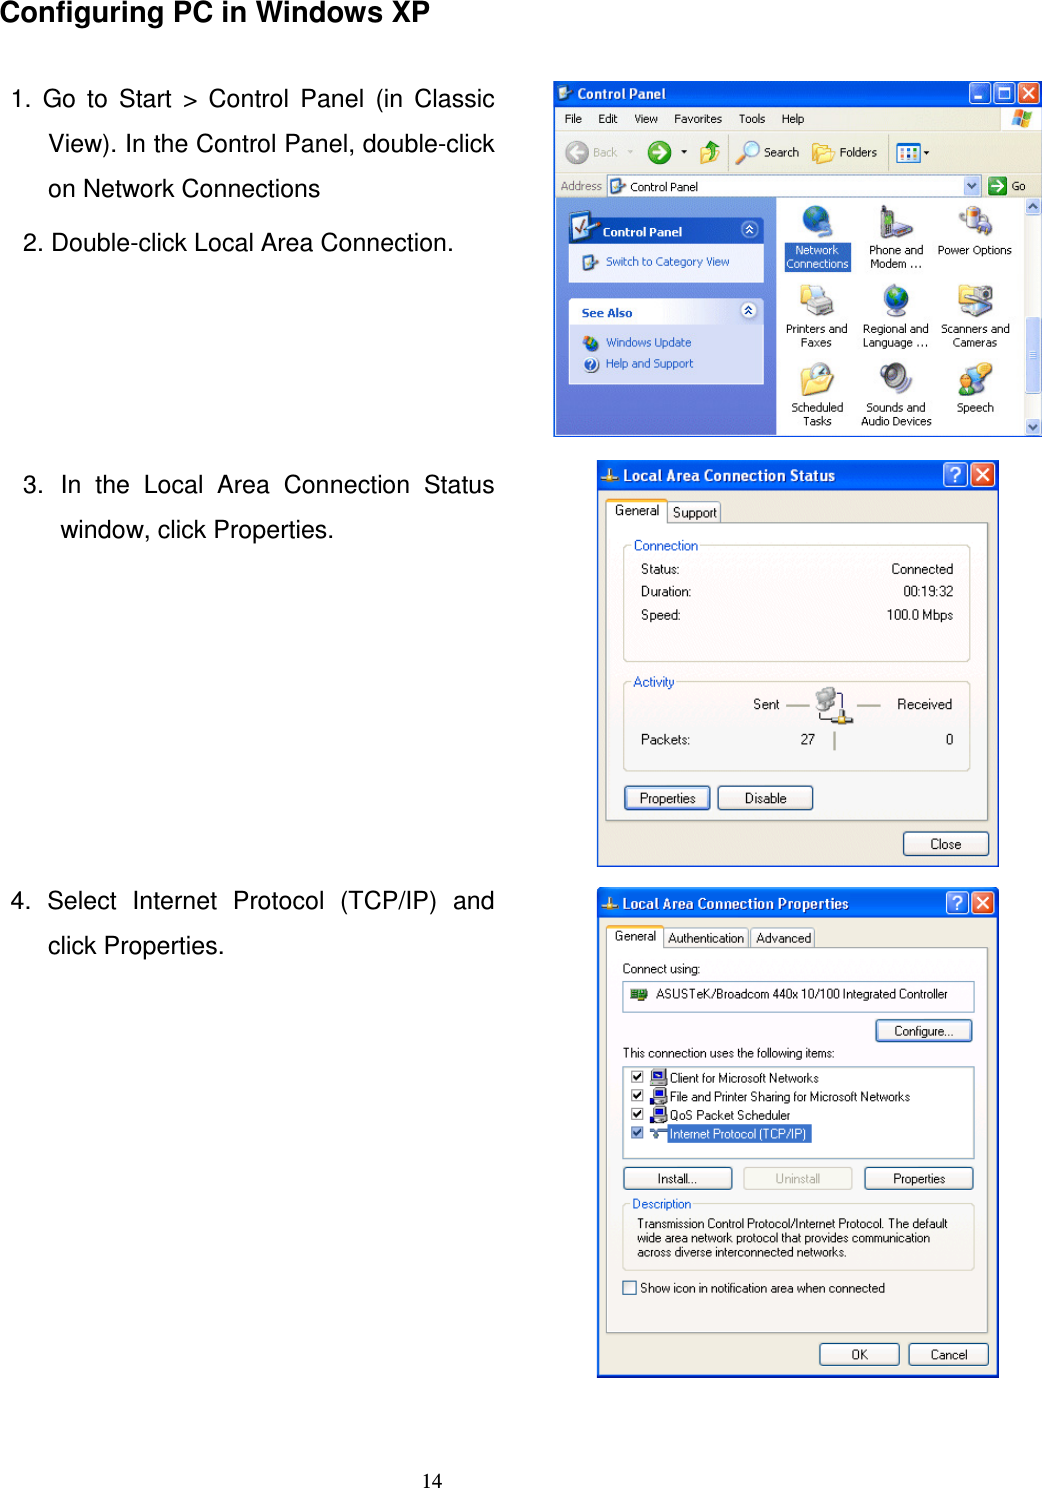   14Configuring PC in Windows XP  1.  Go  to  Start  &gt;  Control  Panel  (in  Classic View). In the Control Panel, double-click on Network Connections 2. Double-click Local Area Connection.   3.  In  the  Local  Area  Connection  Status window, click Properties.   4.  Select  Internet  Protocol  (TCP/IP)  and click Properties.  